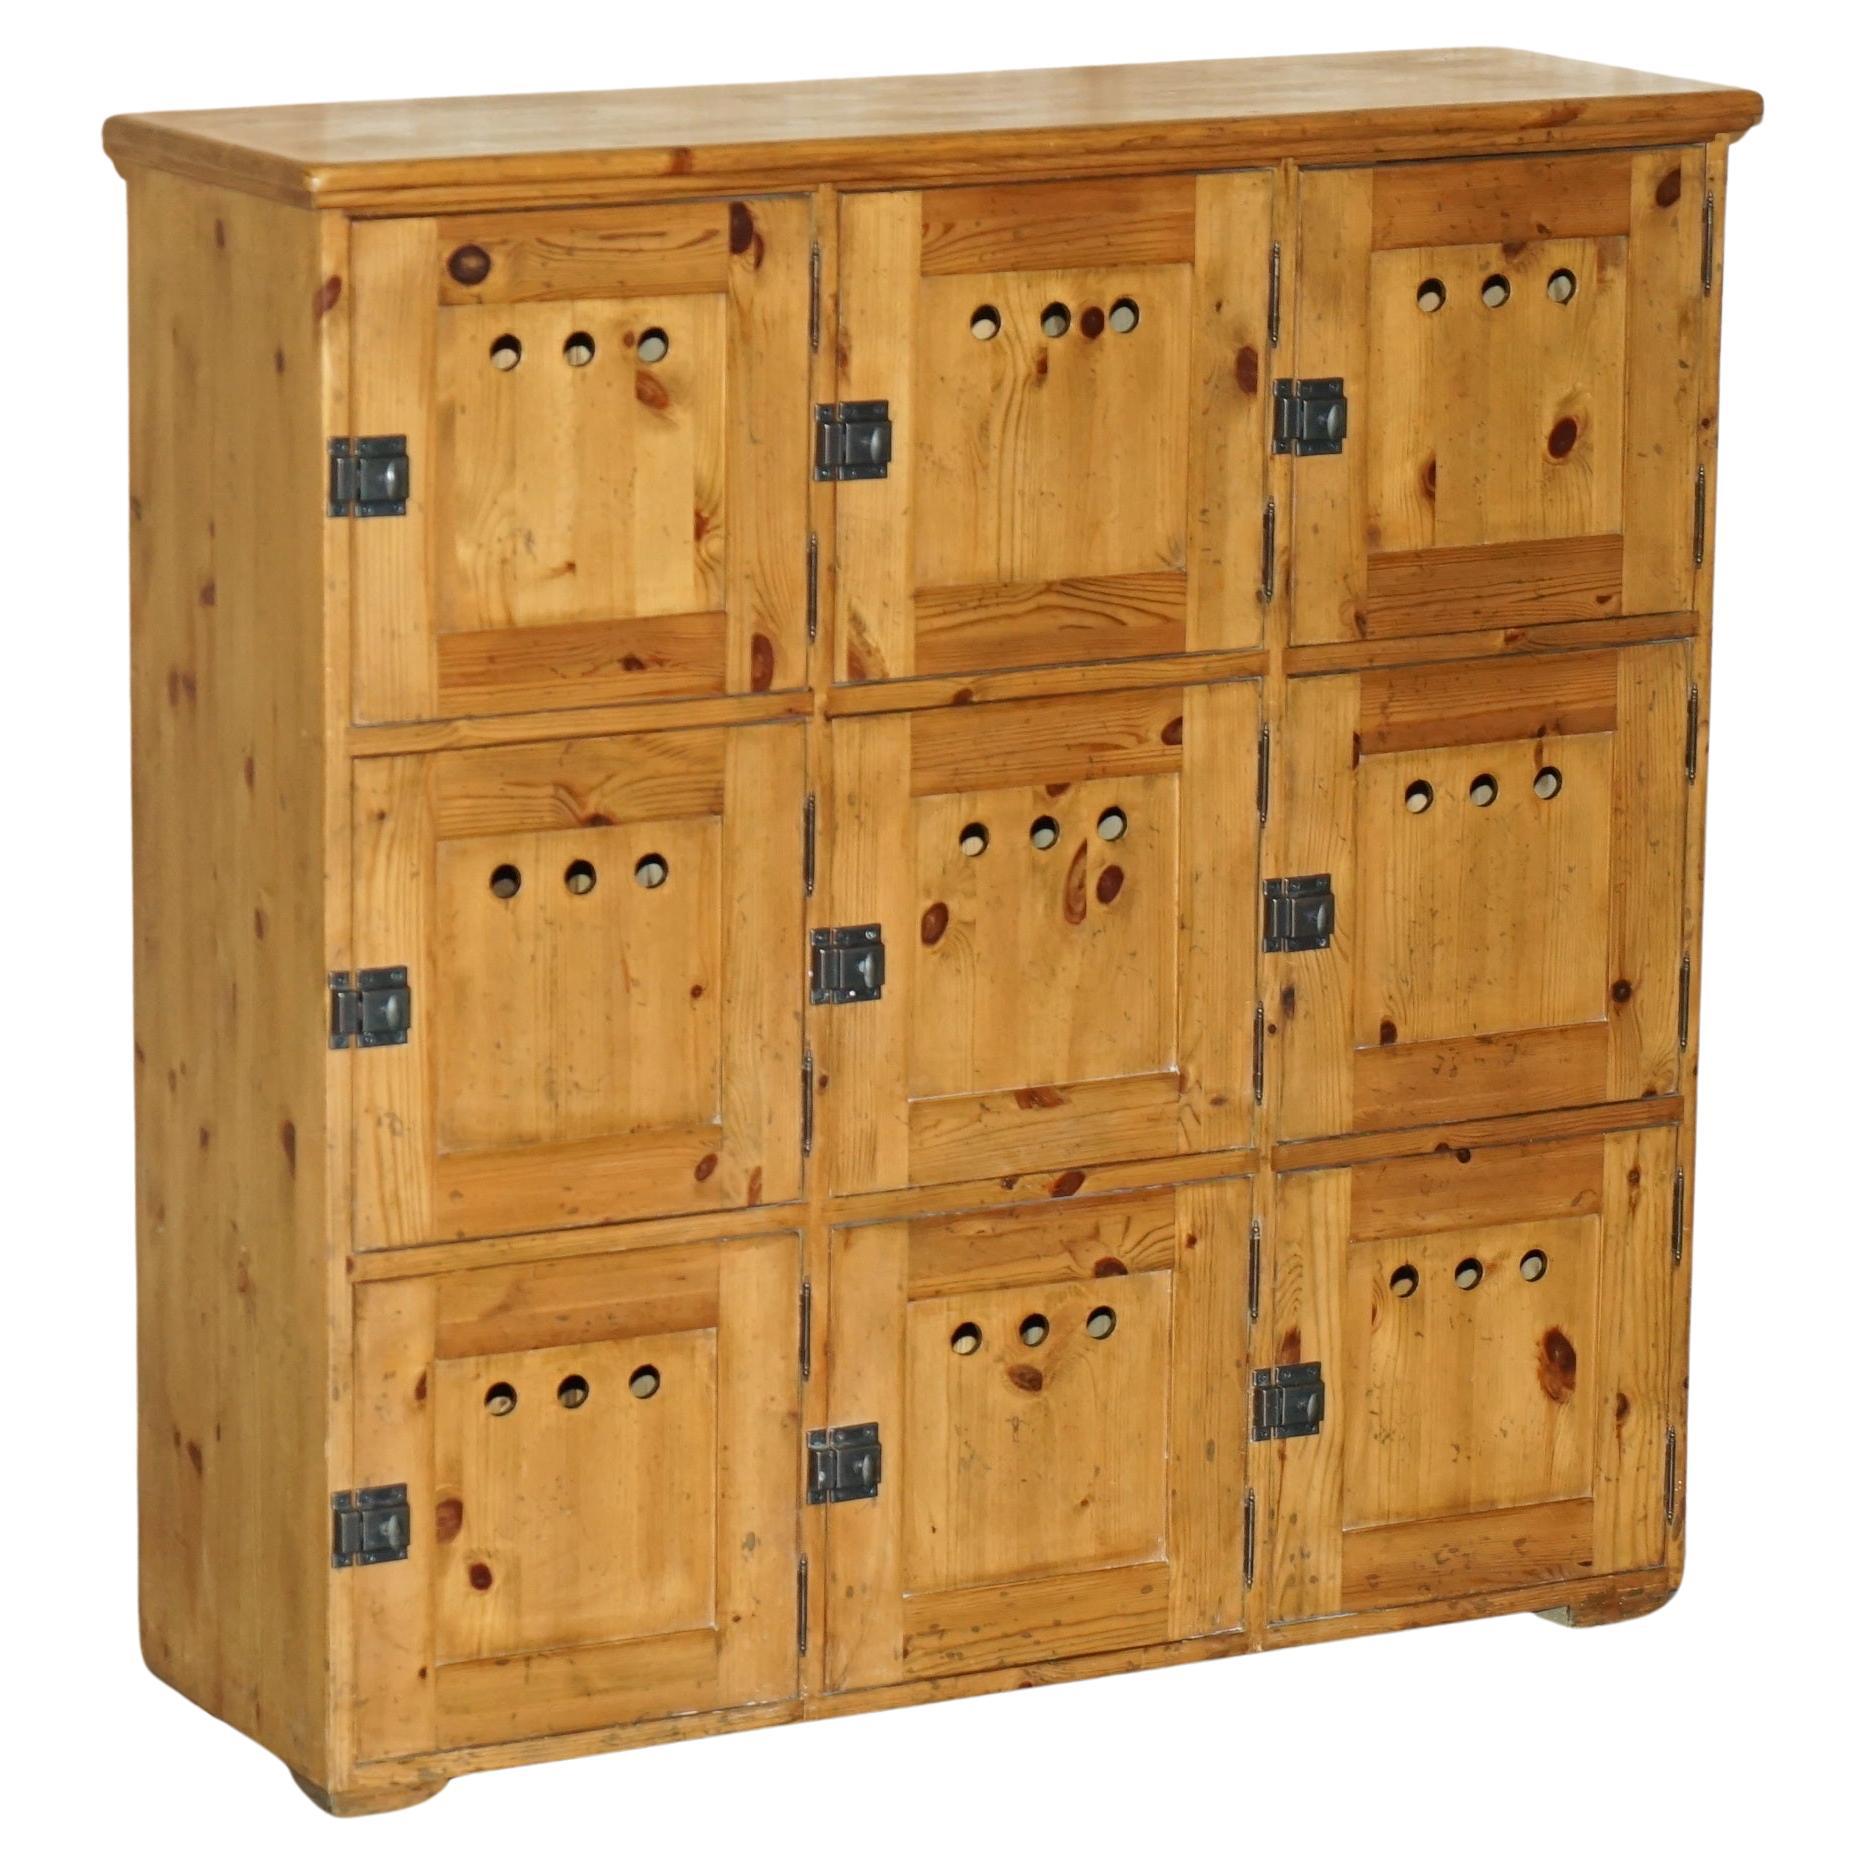 STUNNING ANTiQUE CIRCA 1930'S ENGLISH OAK LOCKER CABINET IDEAL FOR STORING SHOES For Sale